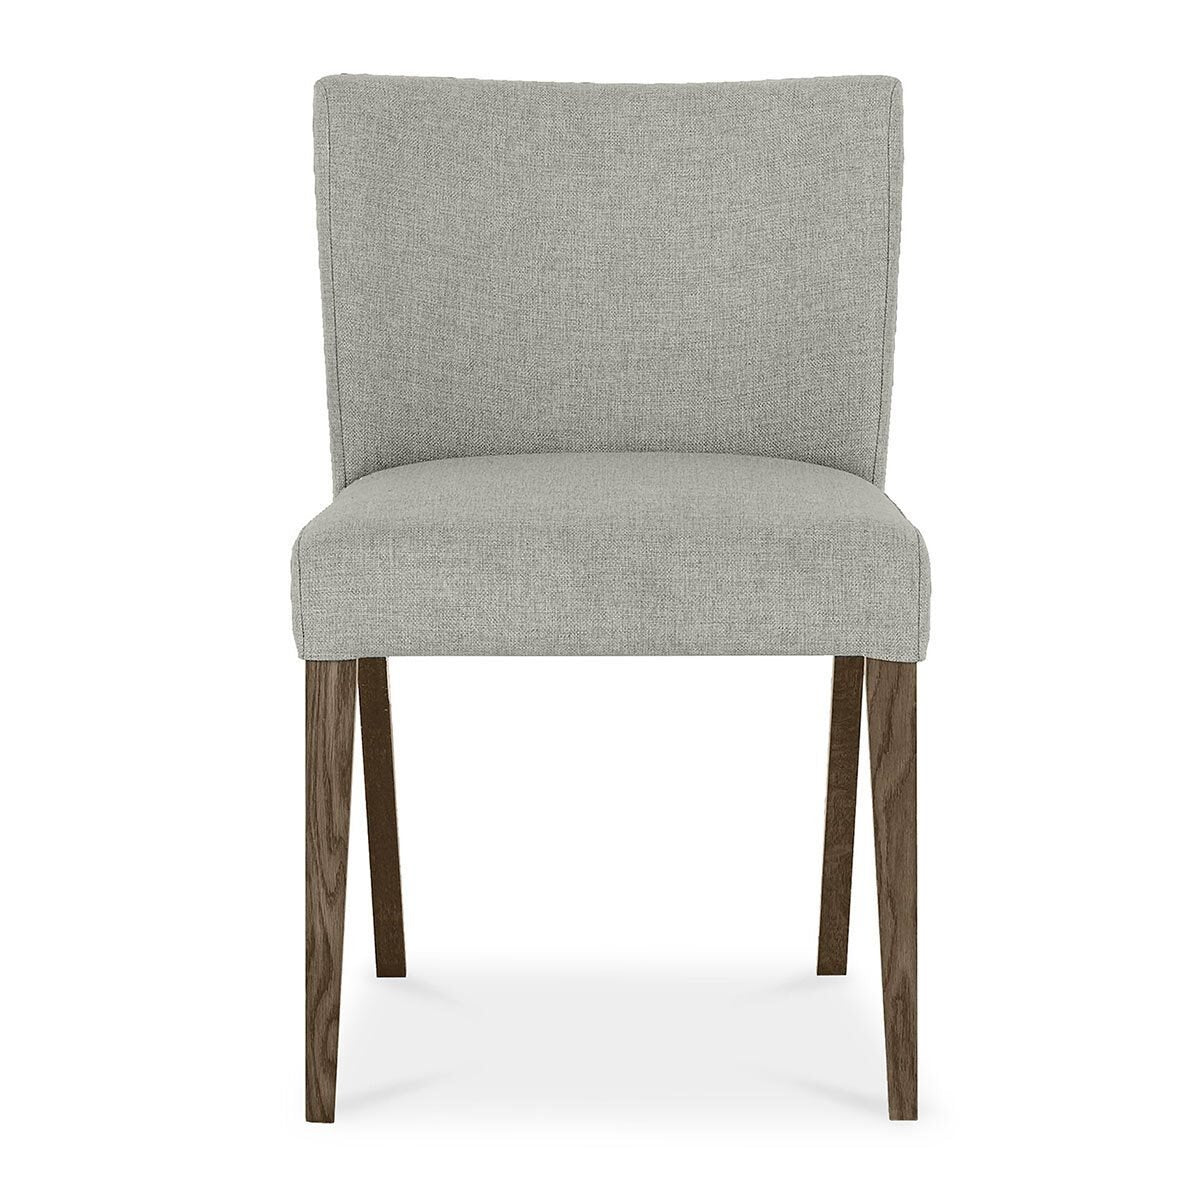 Bentley Designs Milan Low Back Grey Upholstered Dining Chairs, 2 Pack - Signature Retail Stores